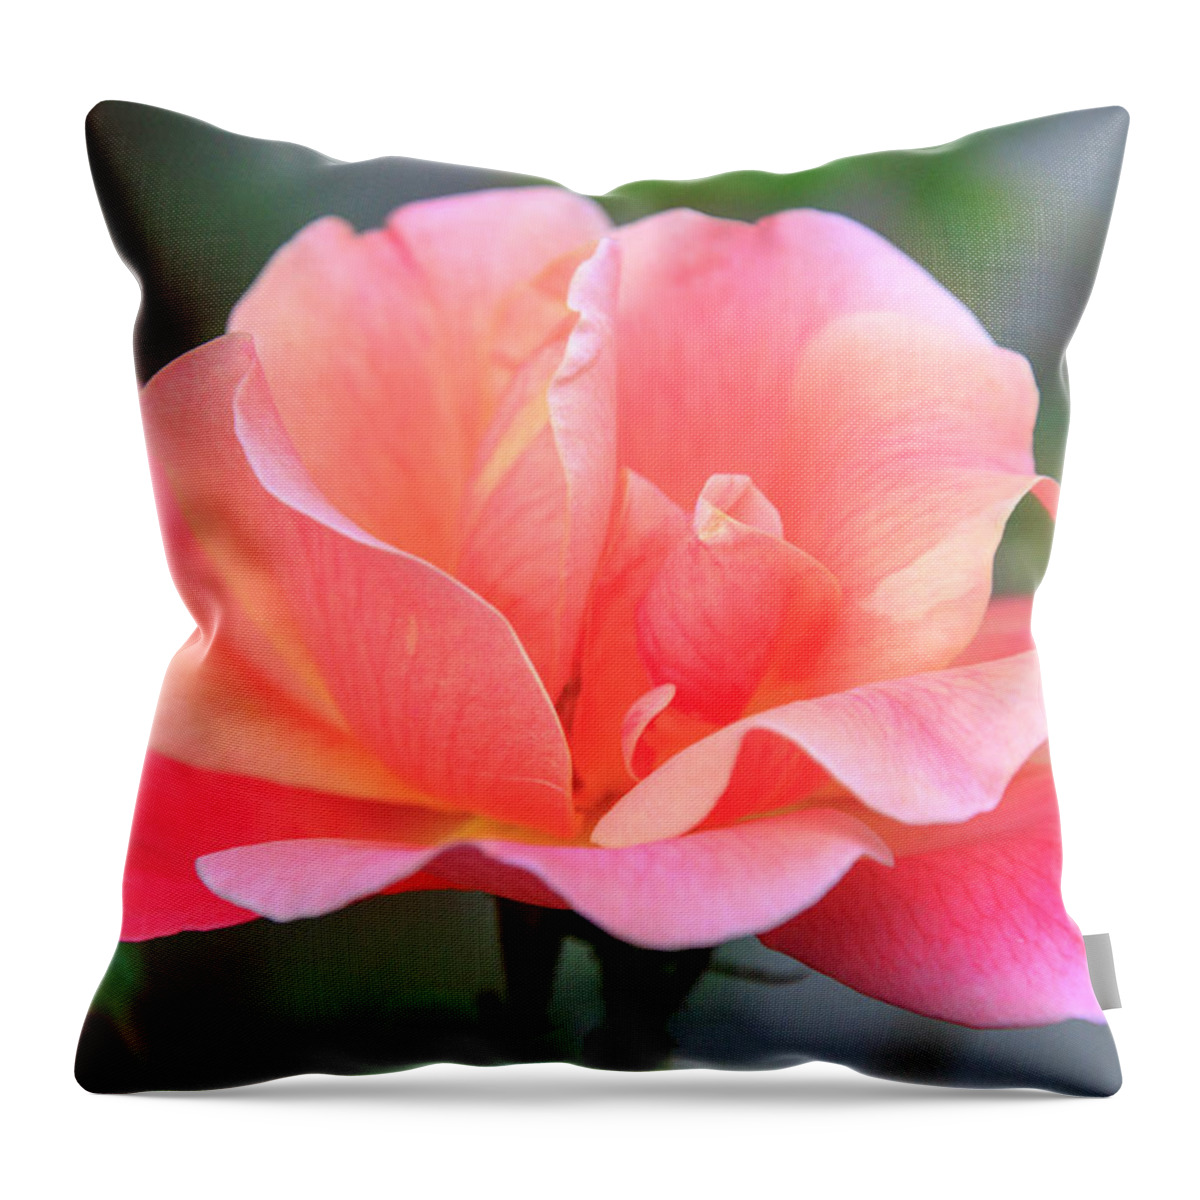 Flower Throw Pillow featuring the photograph Pink Delight by Her Arts Desire